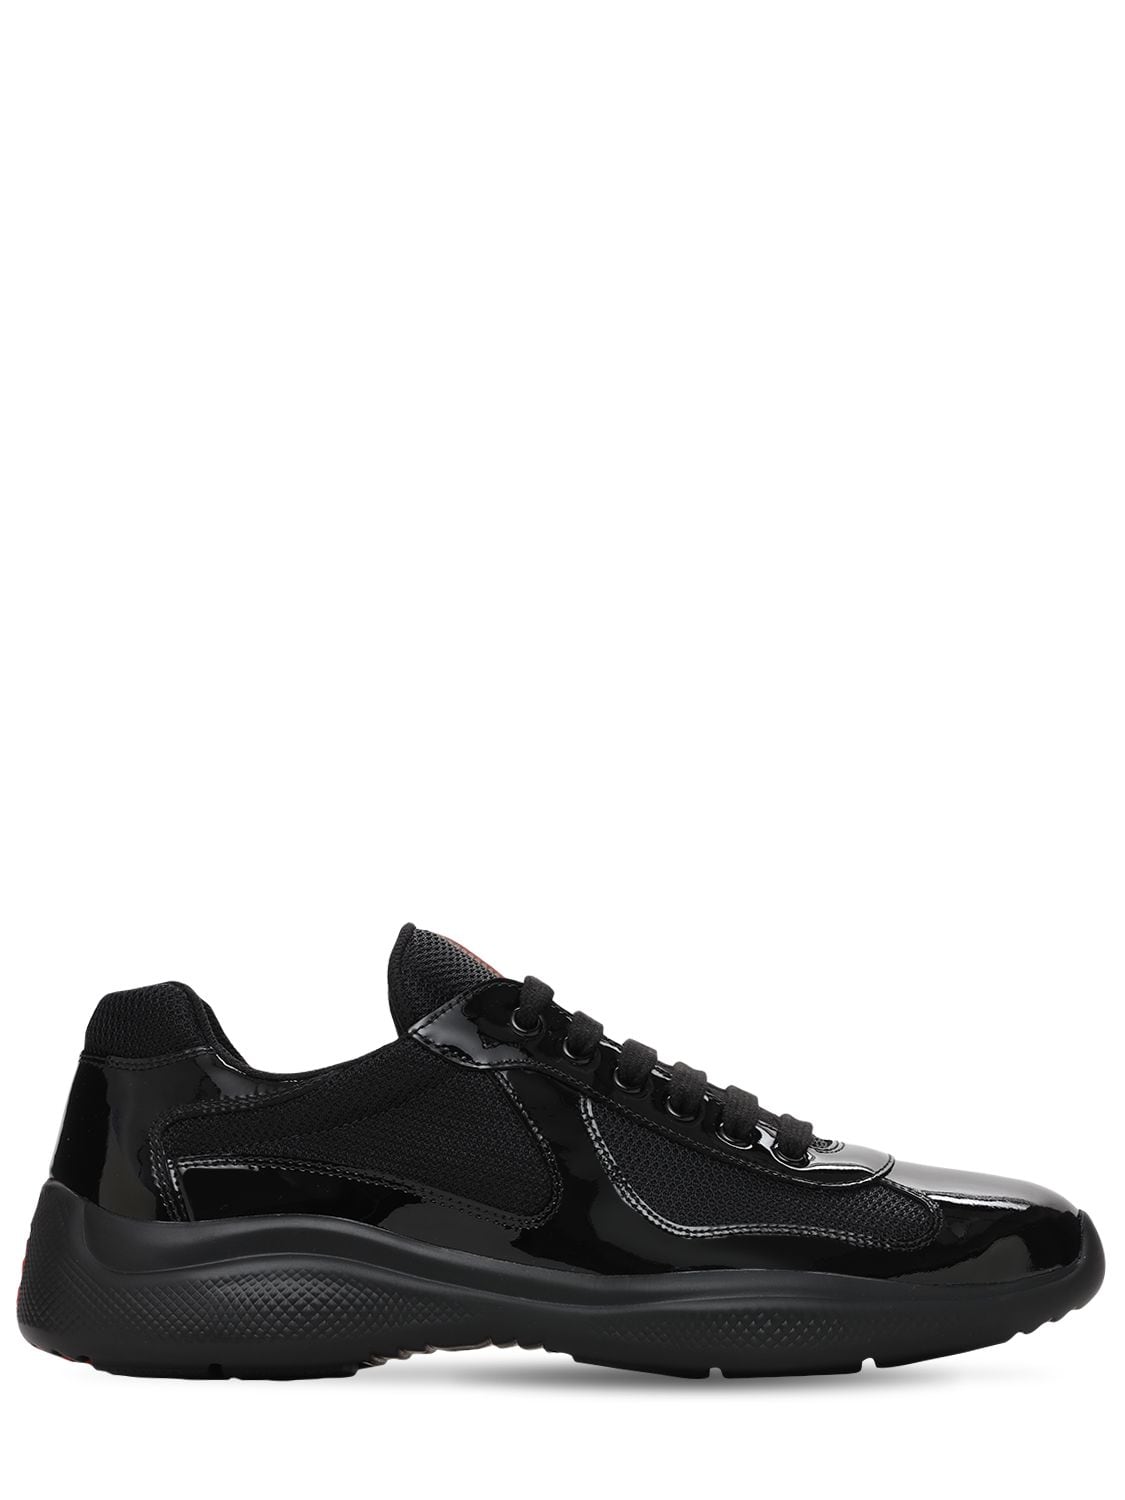 Prada America's Cup Leather & Mesh Trainers In Black